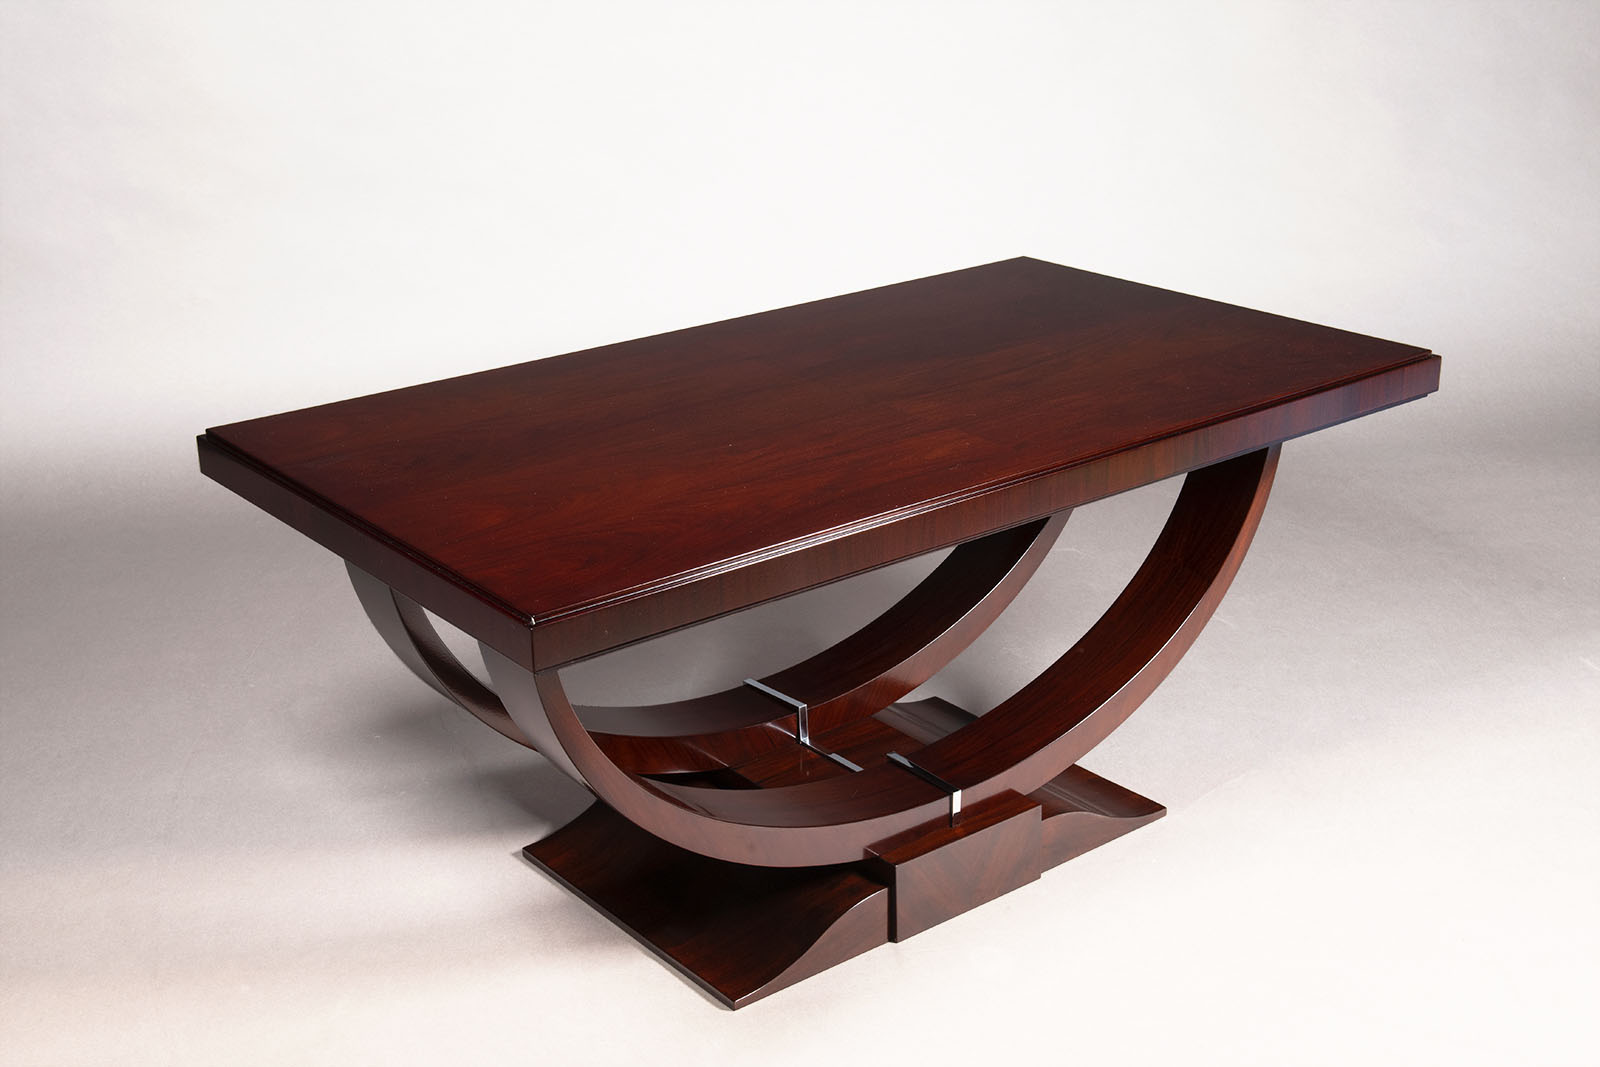 A French Art Deco Inspired Coffee Table by ILIAD Design